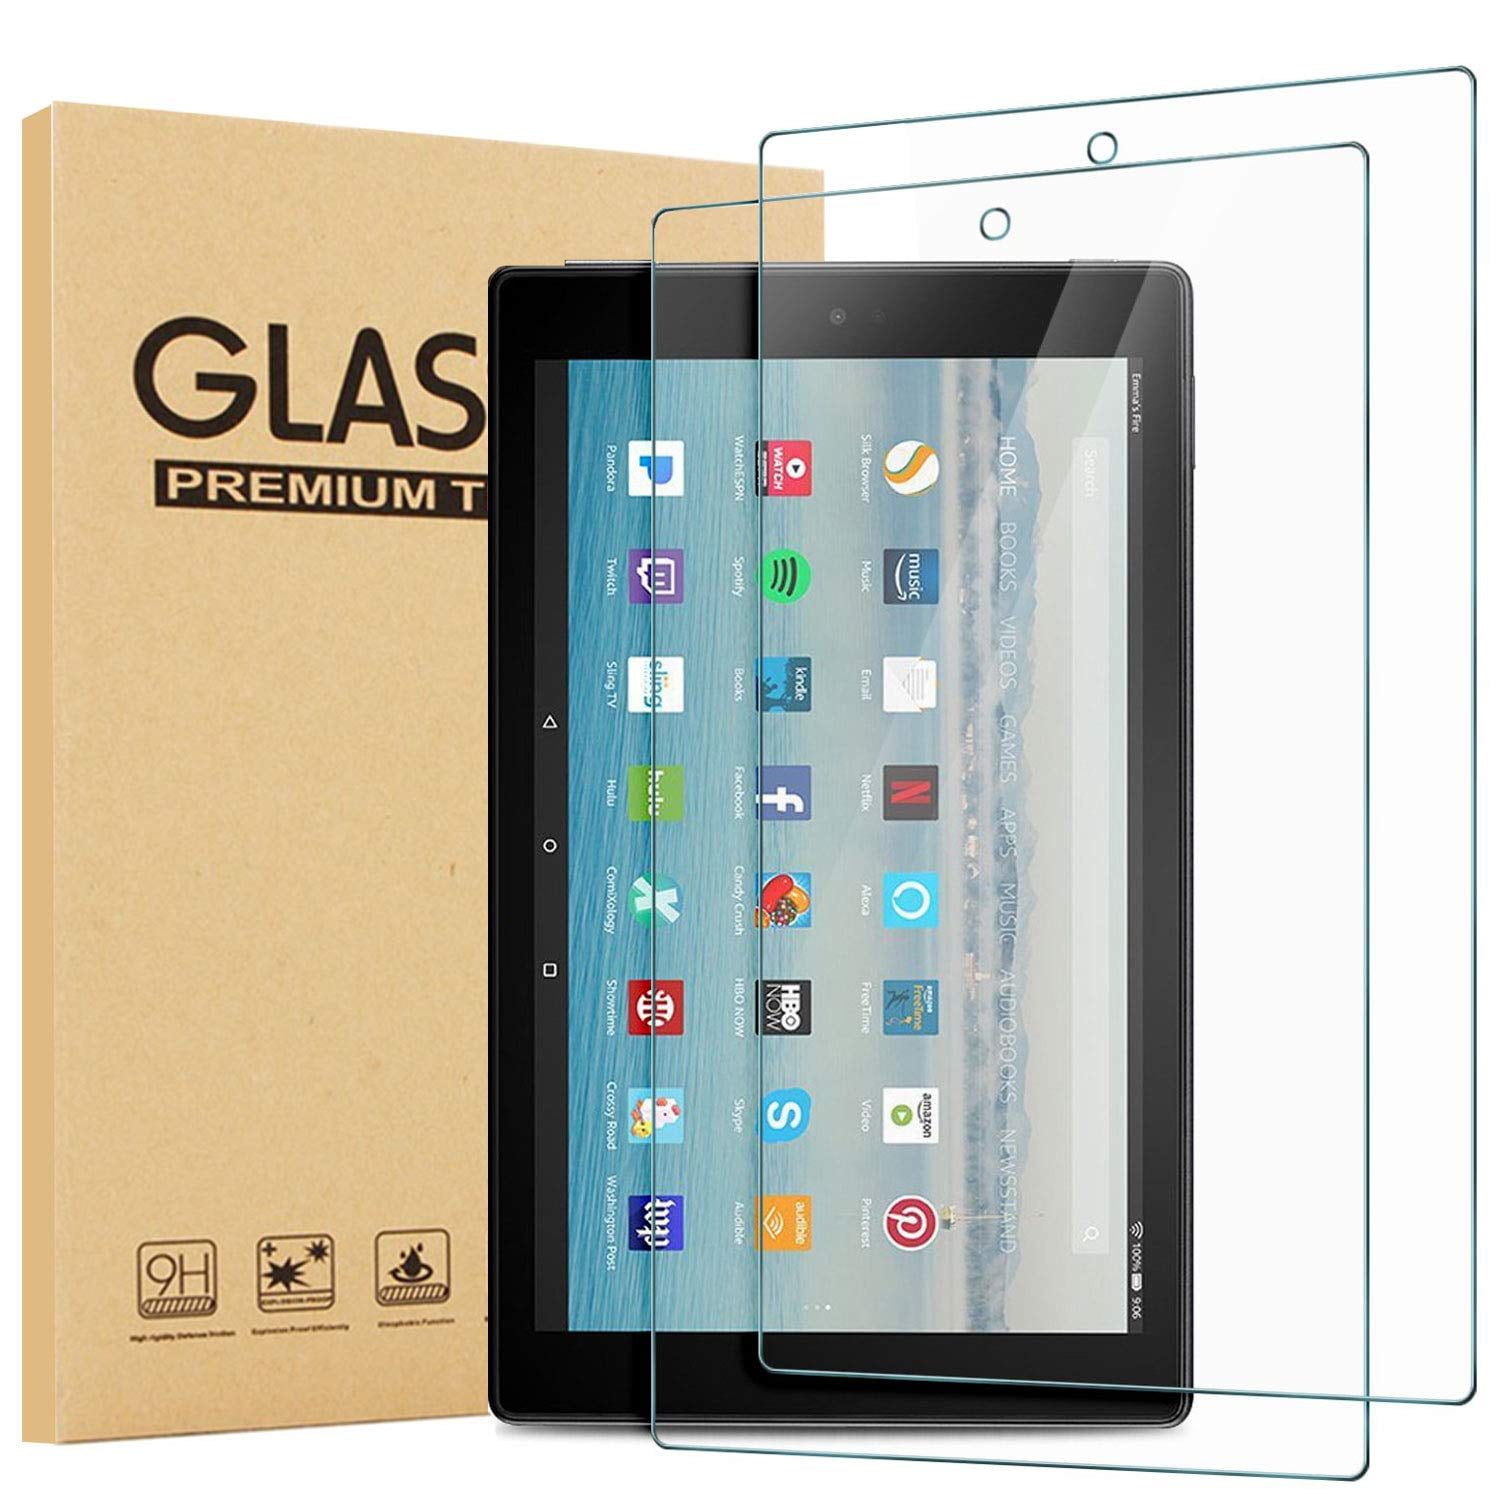 HD 8"/ HD 10" Tablet Tempered Glass Screen Protector For Amazon Kindle fire 7" 